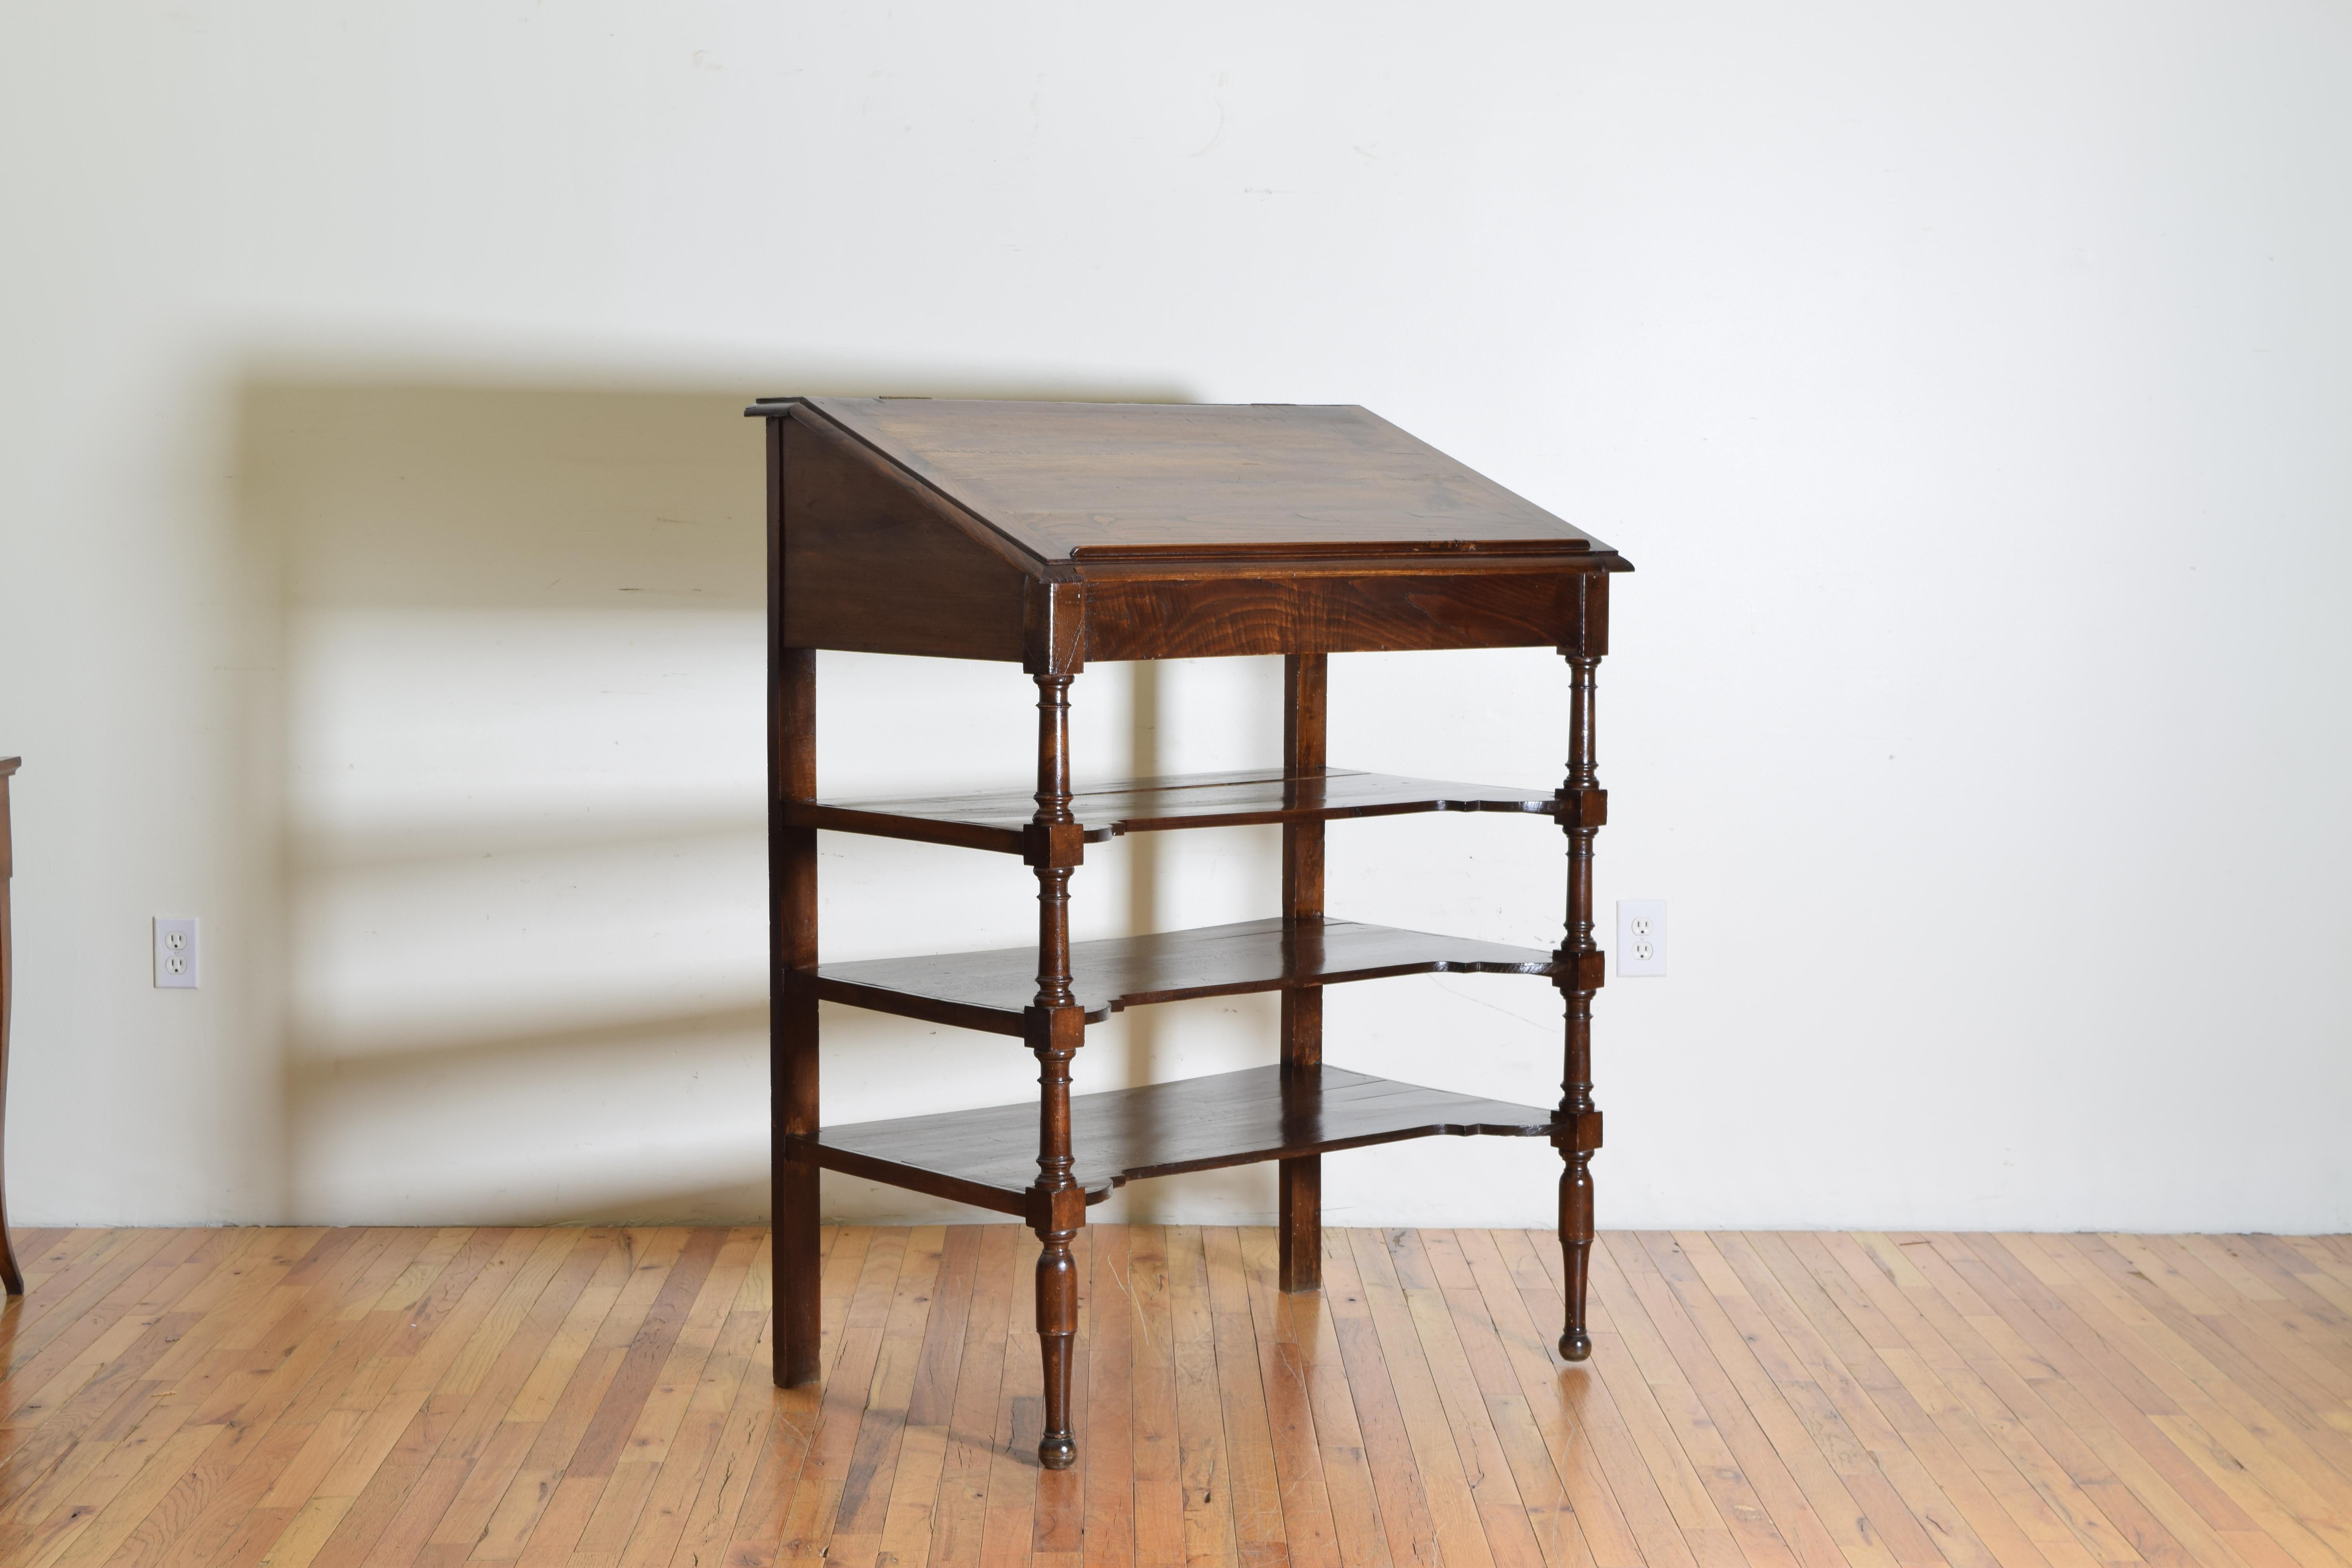 The upper slanted section with a raised bookrest has a hinge opening to a reveal a storage well, with three shaped shelves connecting turned front legs and block rear legs, early third quarter of the 19th century.